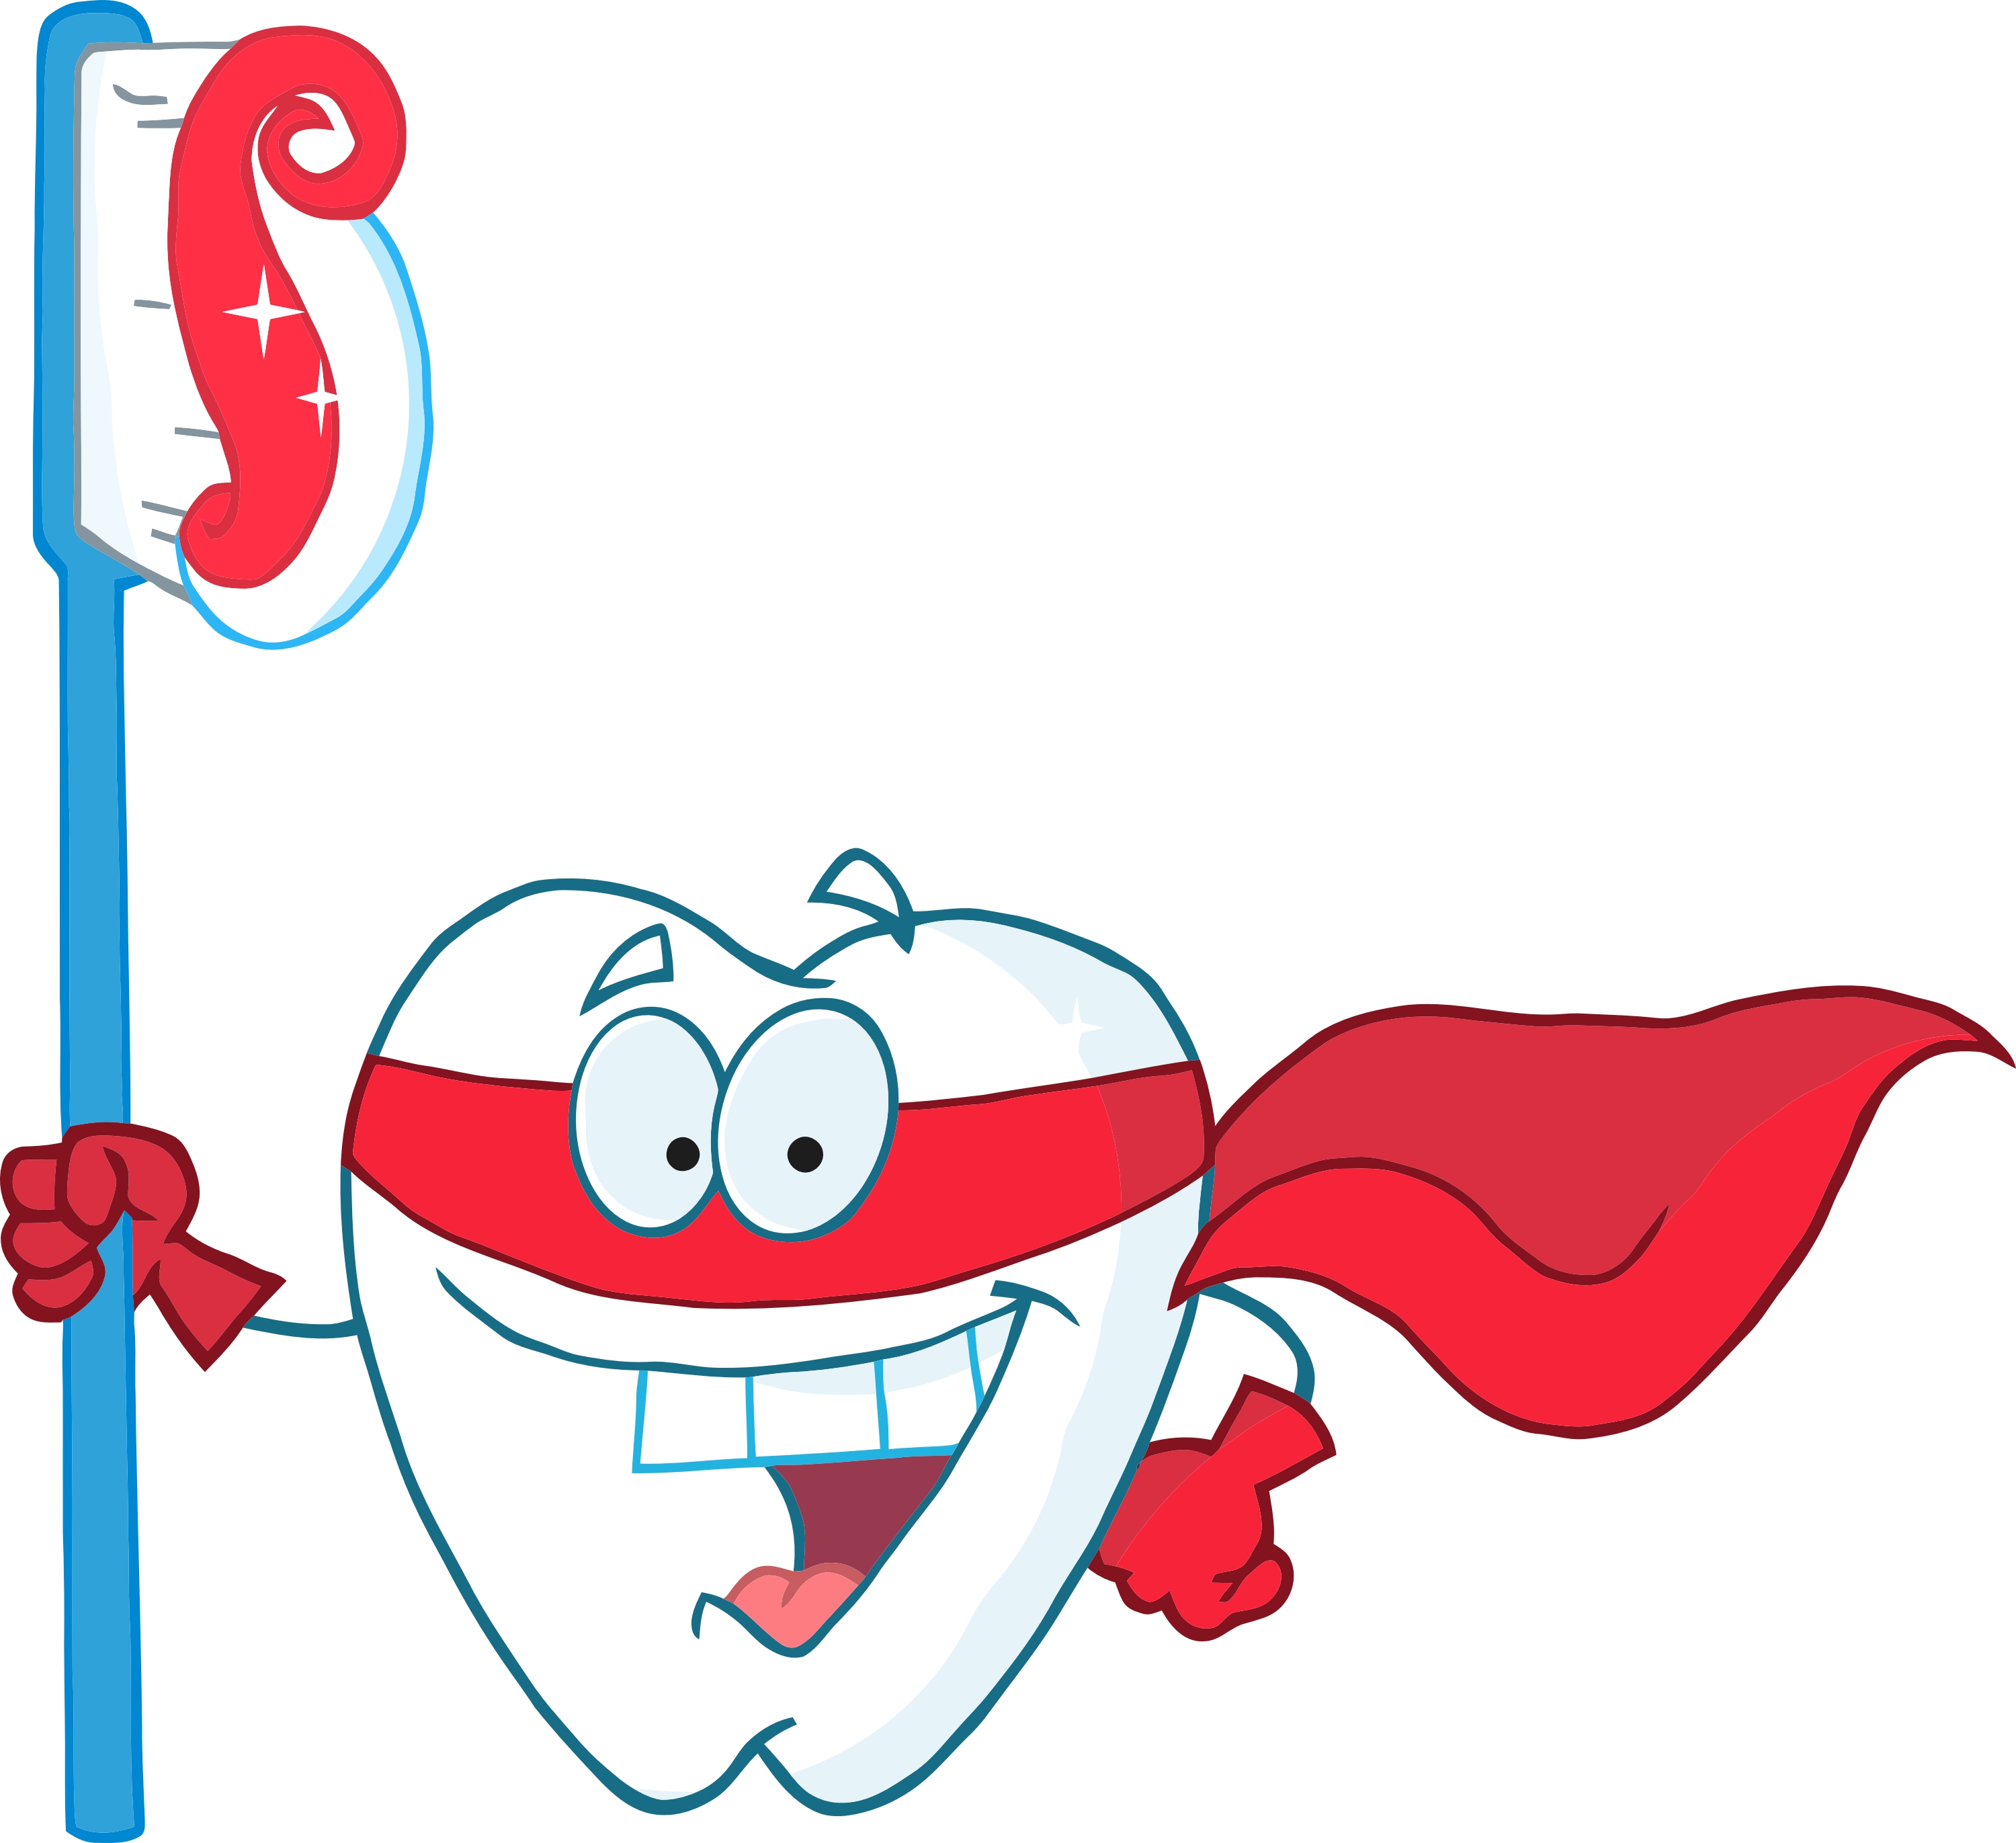 Dental Hygiene   The Habits For A Lifetime Of Oral Health   Clipart